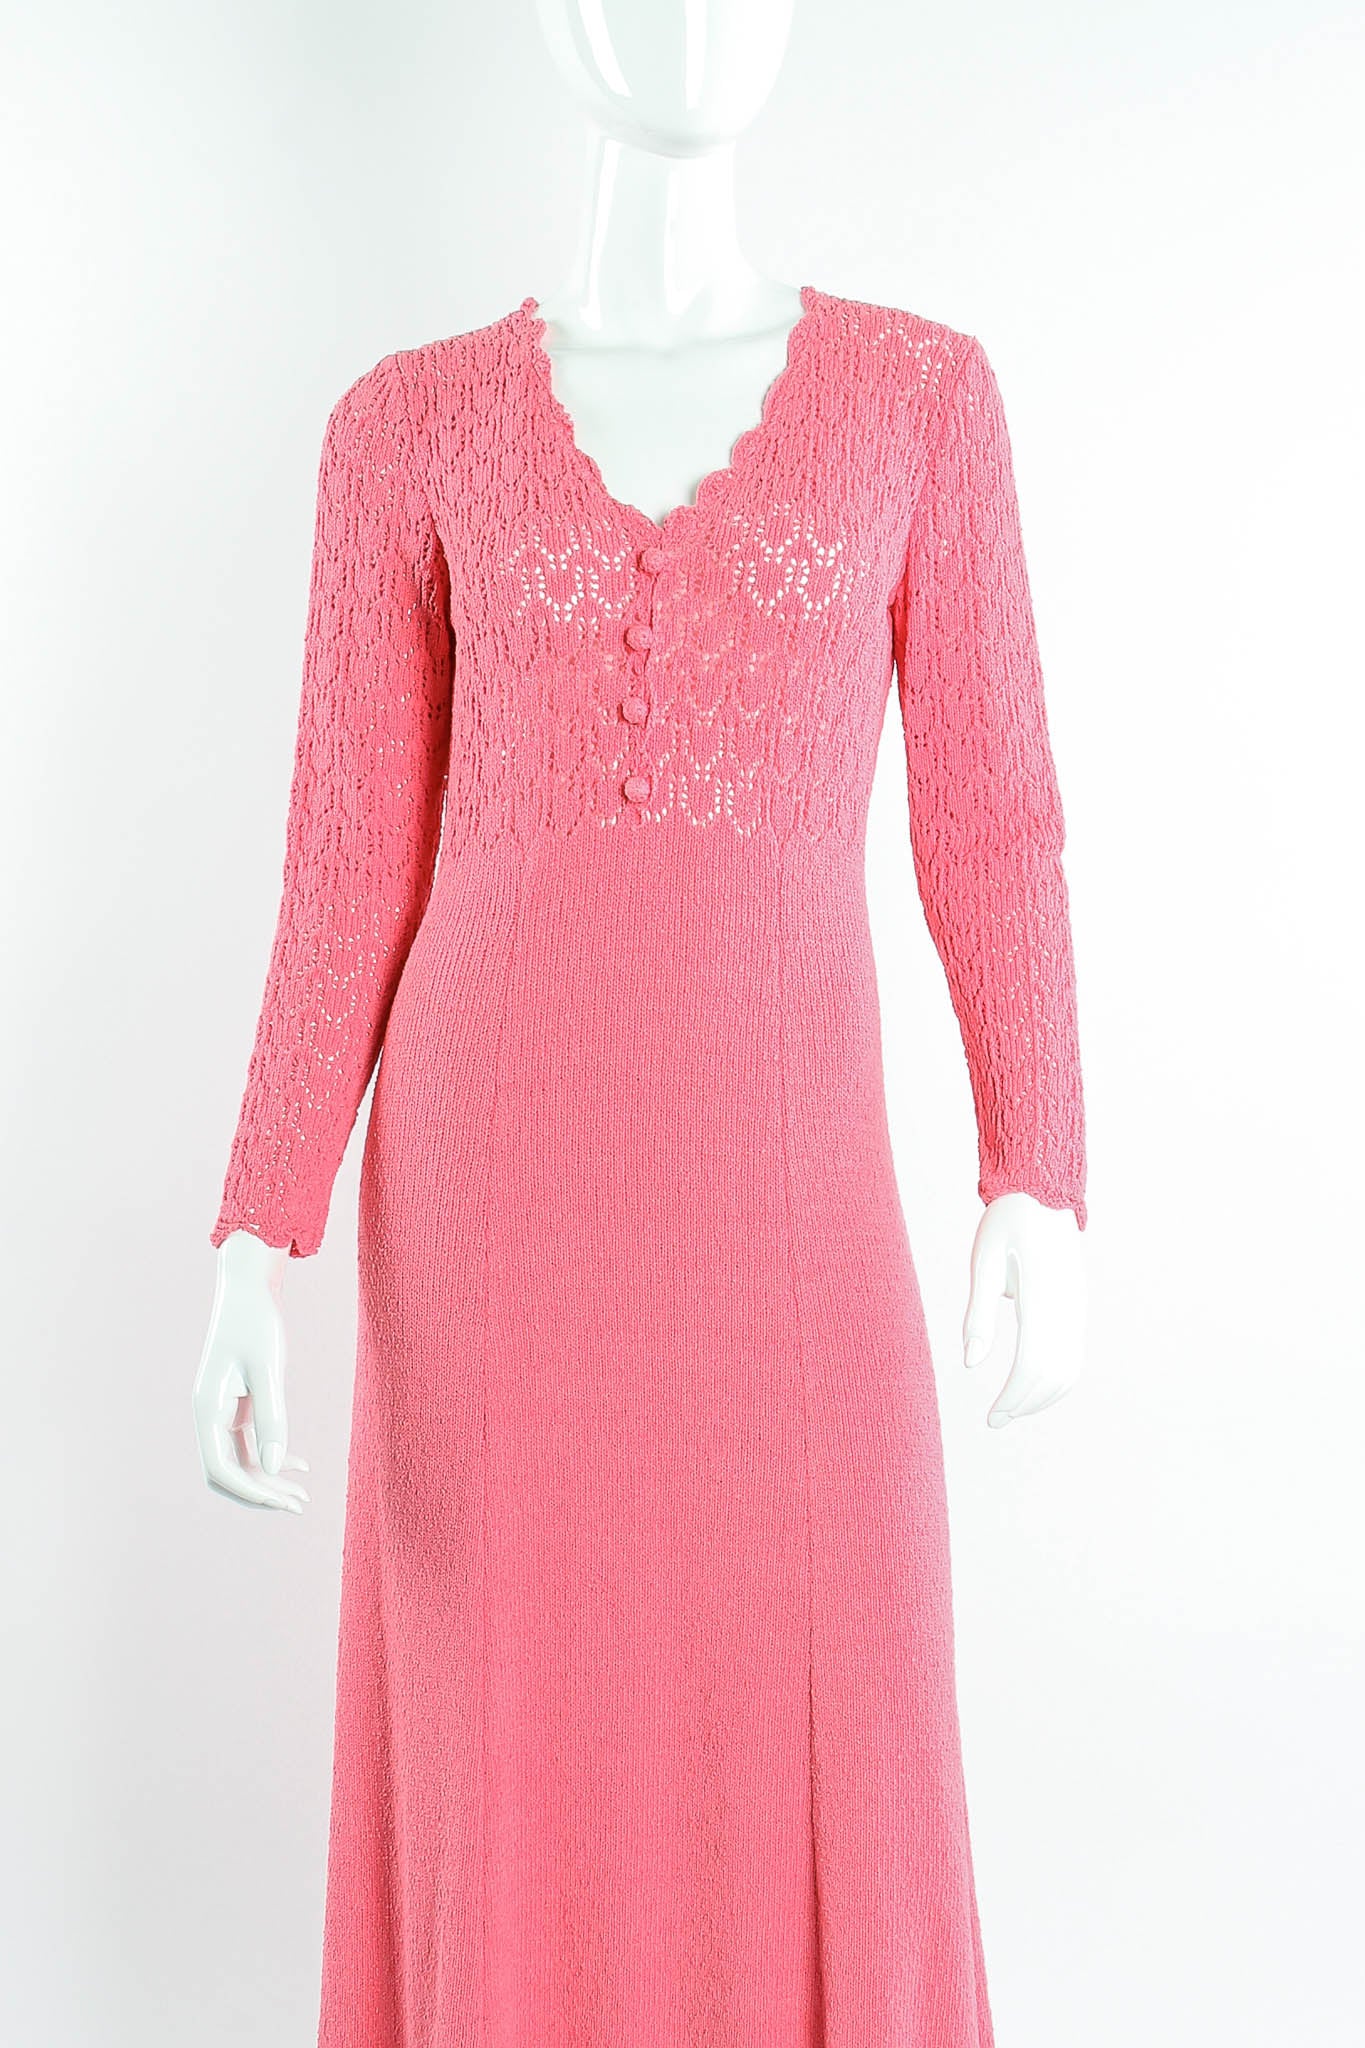 Vintage Picardo Knits Scalloped Crochet Knit Maxi Dress on mannequin crop at Recess Los Angeles